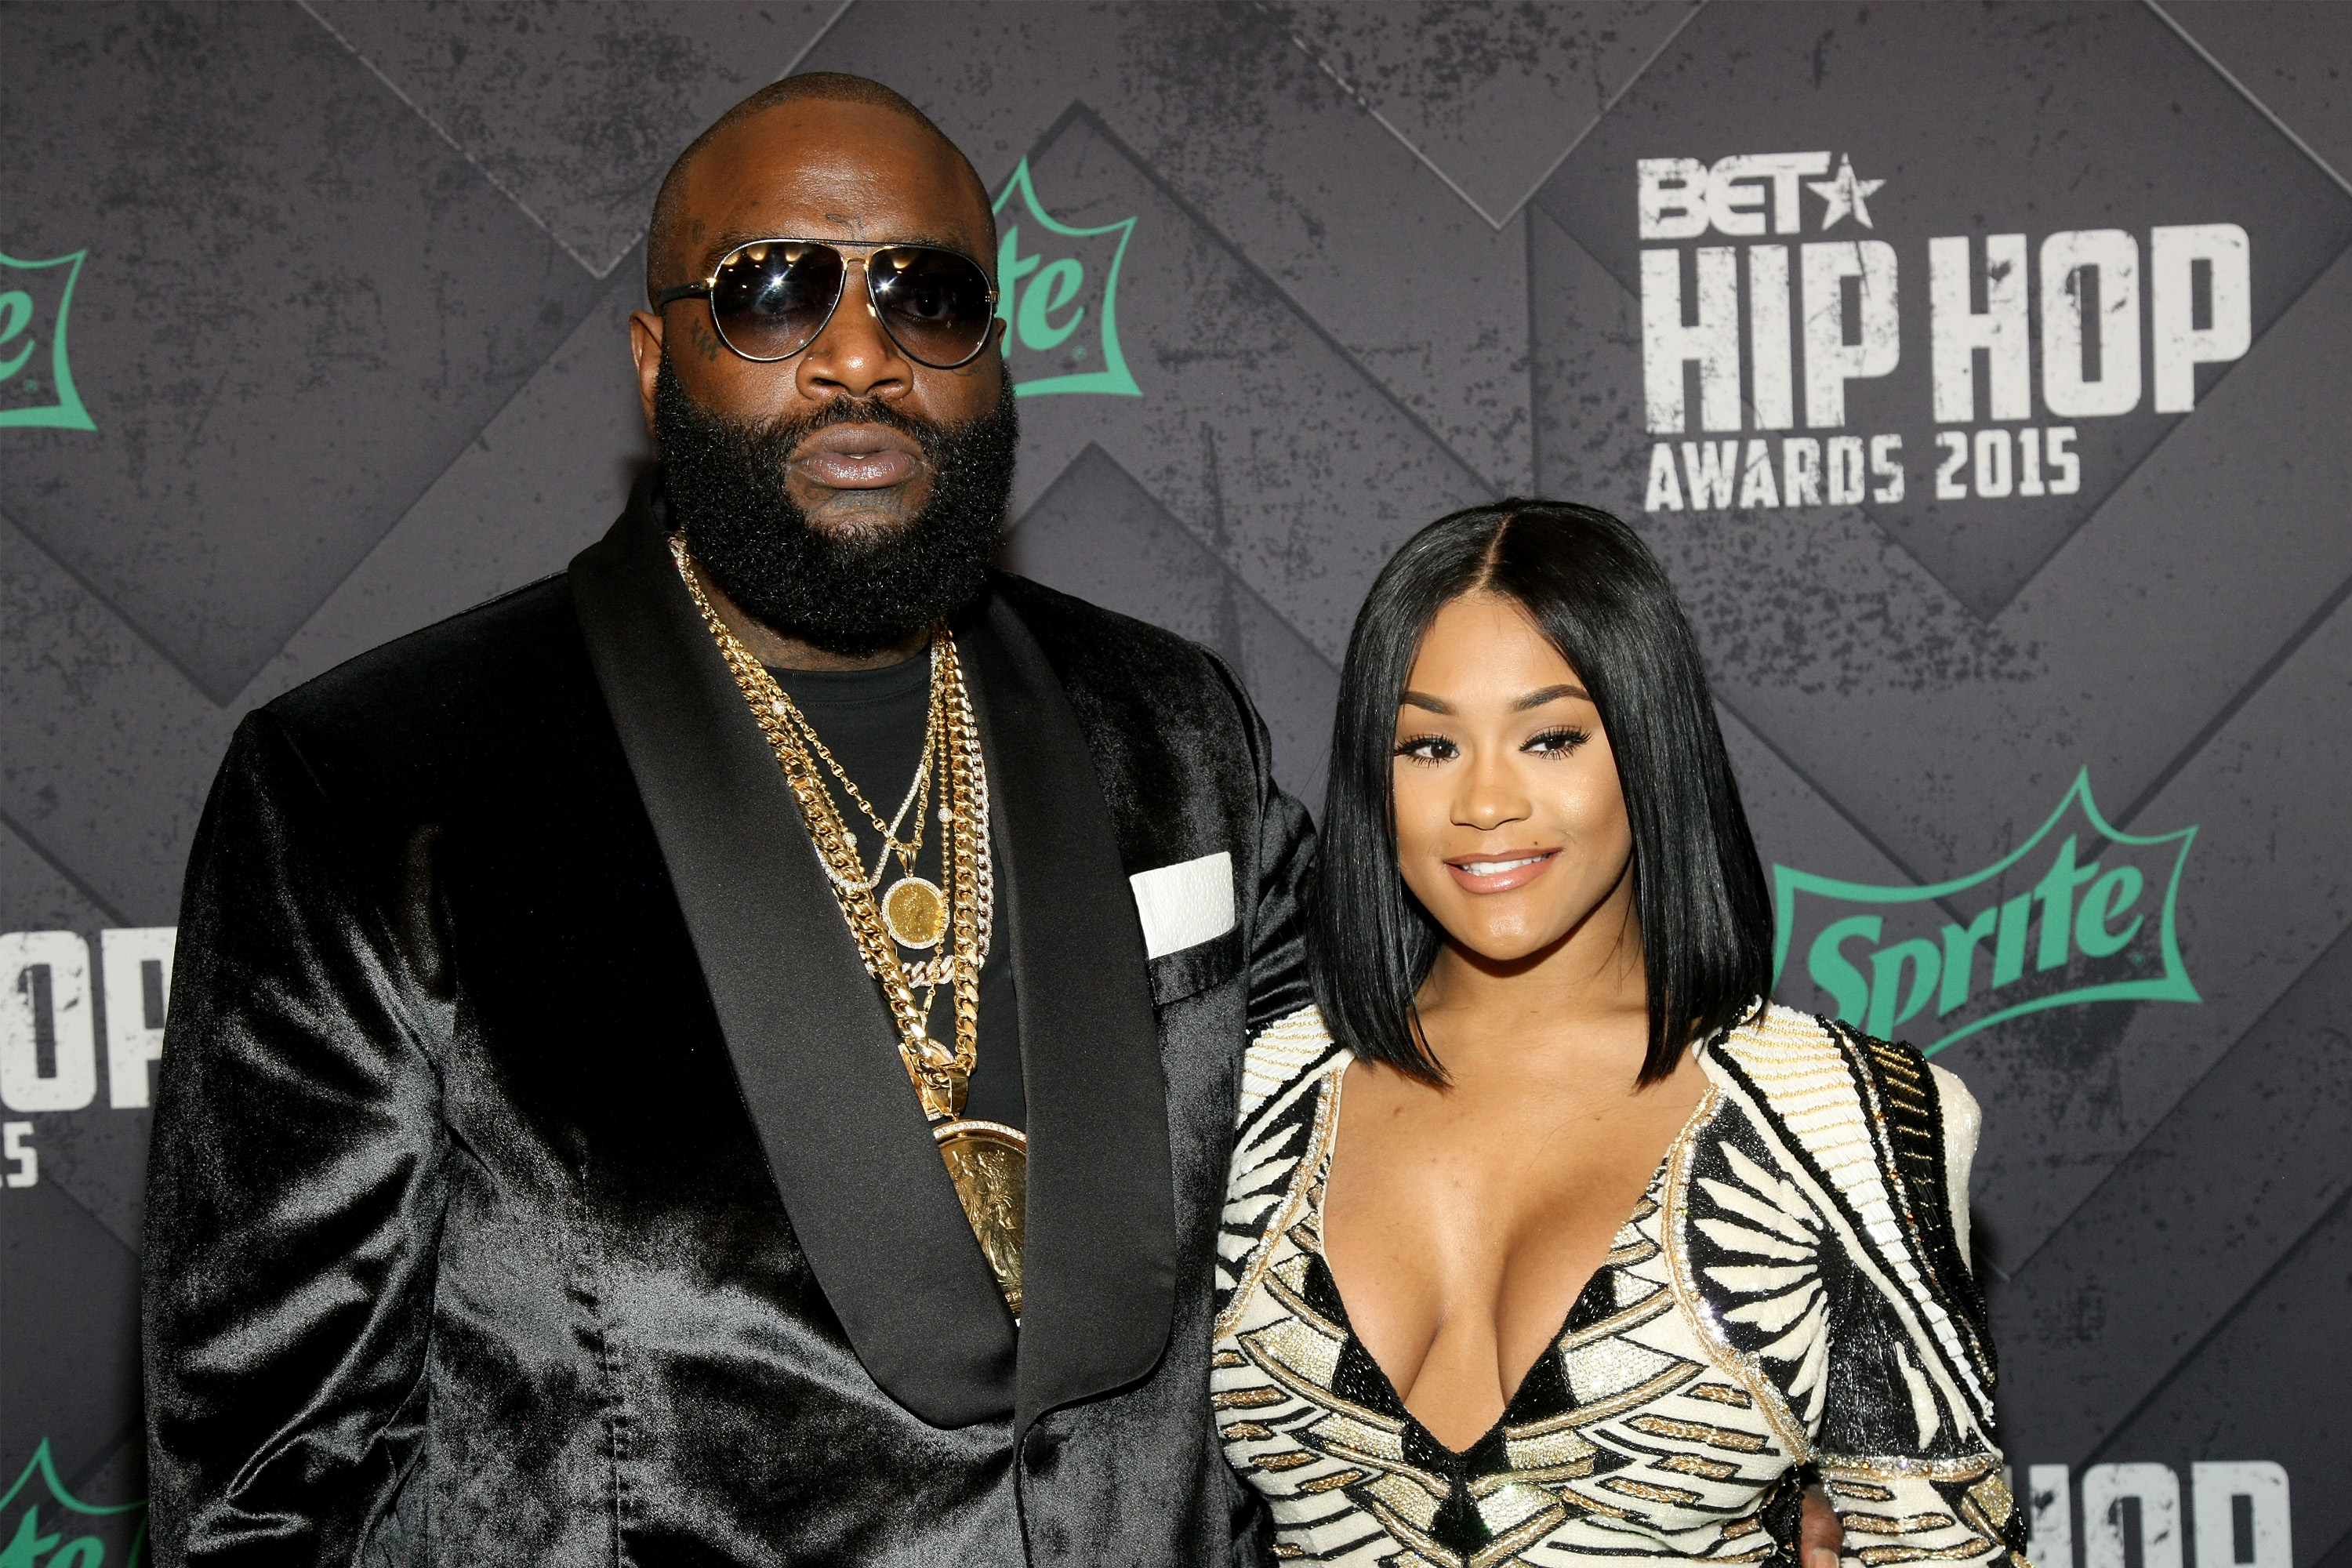 Rick Ross (L) and fiancee Lira Mercer attend the BET Hip Hop Awards 2015 presented by Sprite at Atlanta Civic Center on October 9, 2015 in Atlanta, Georgia. | Source: Getty Images